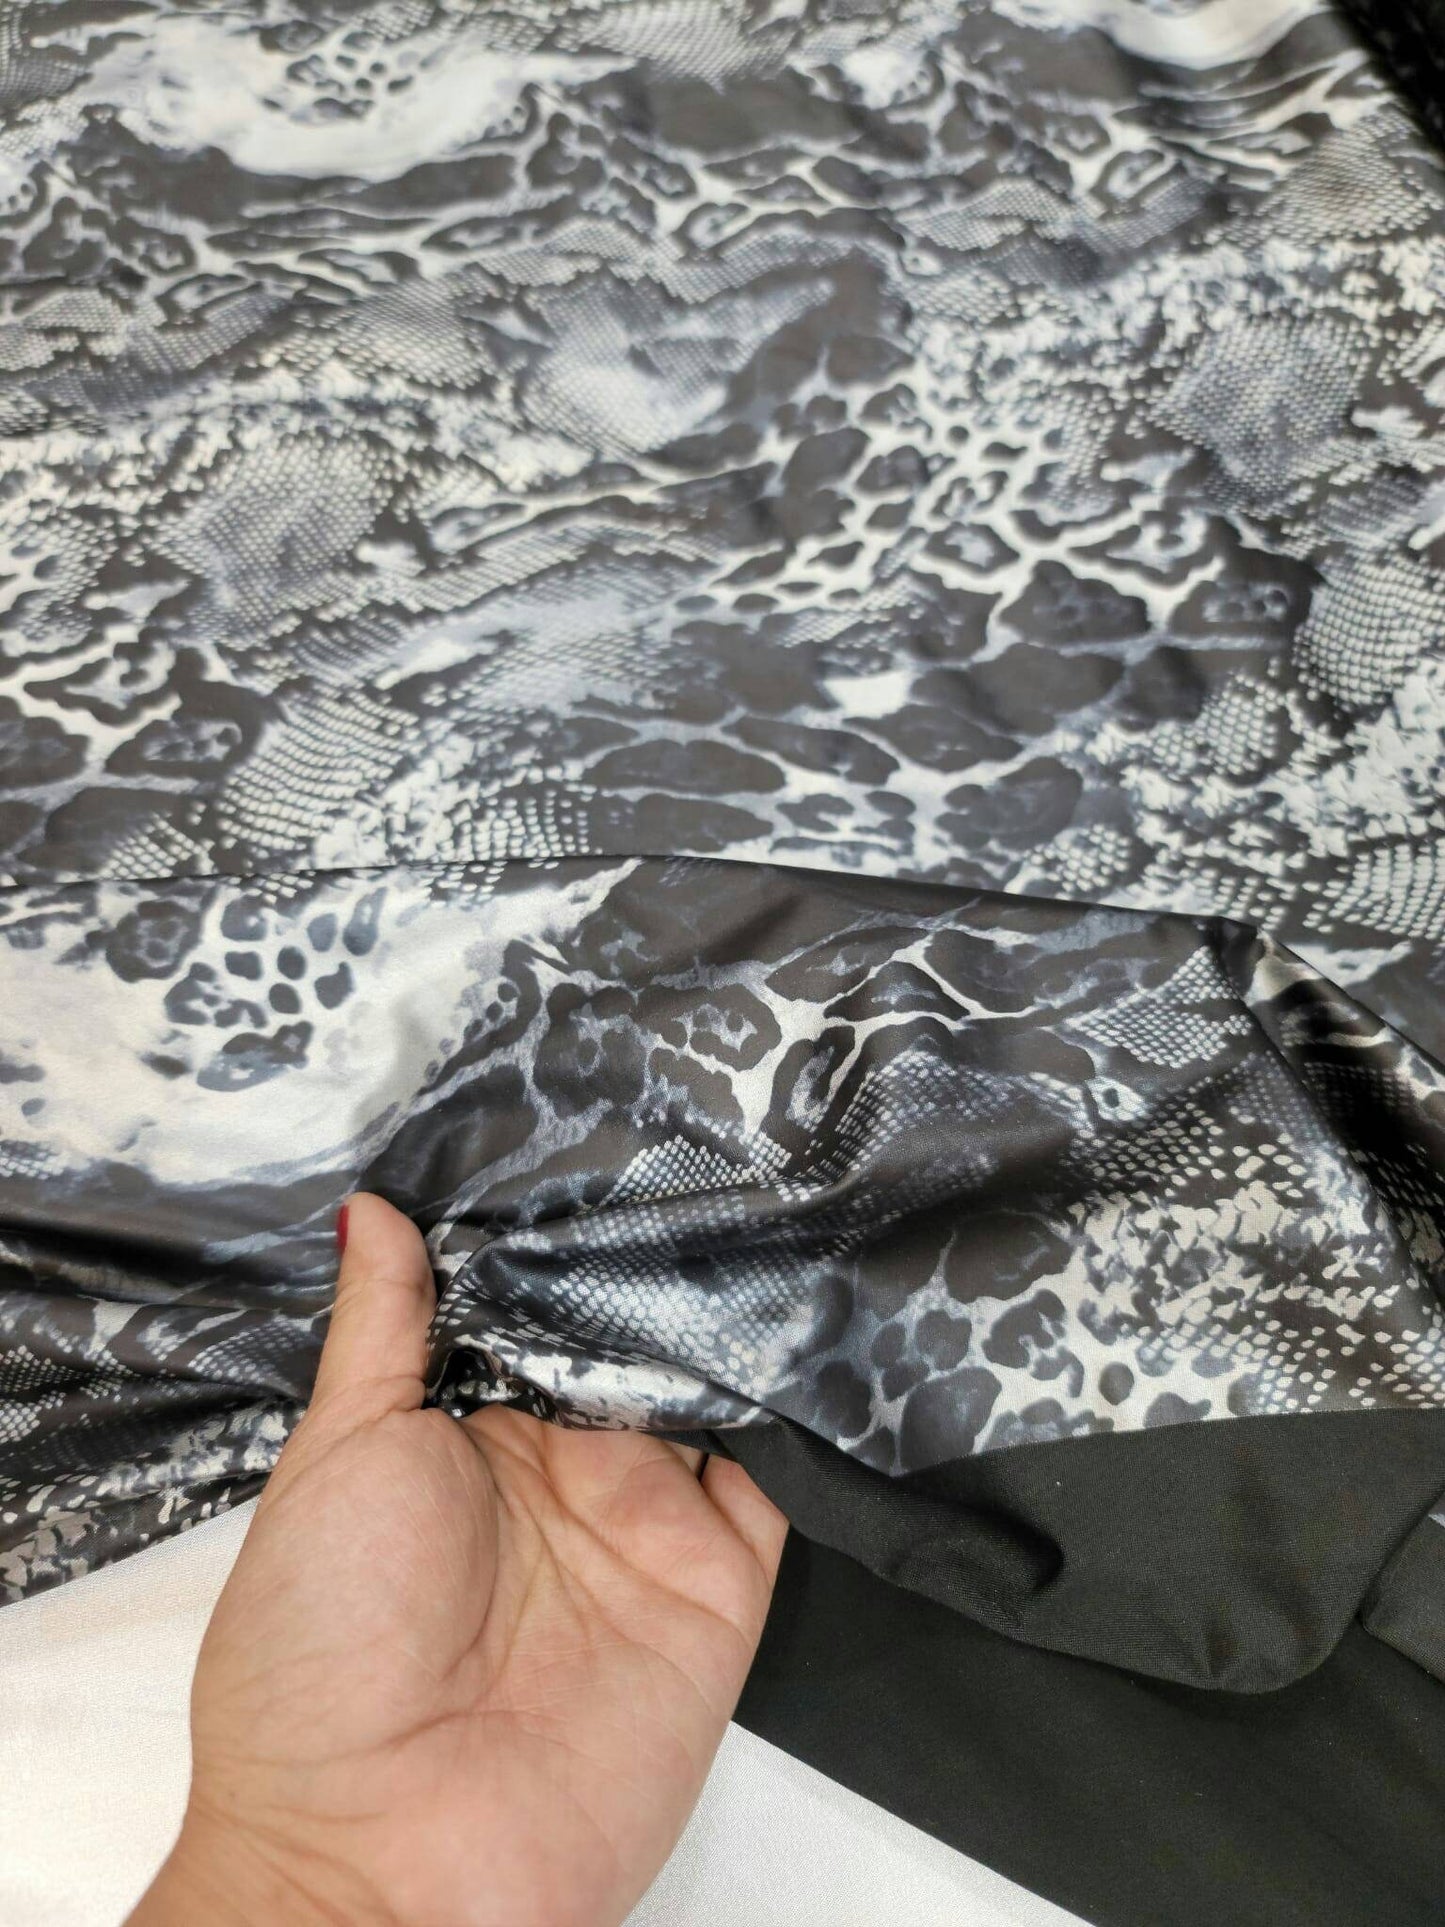 Black Snake Stretch Black and Silver Stretch Spandex Fabric Sold by the Yard Gown Prom Dress Draping Clothing Decoration Animal Print